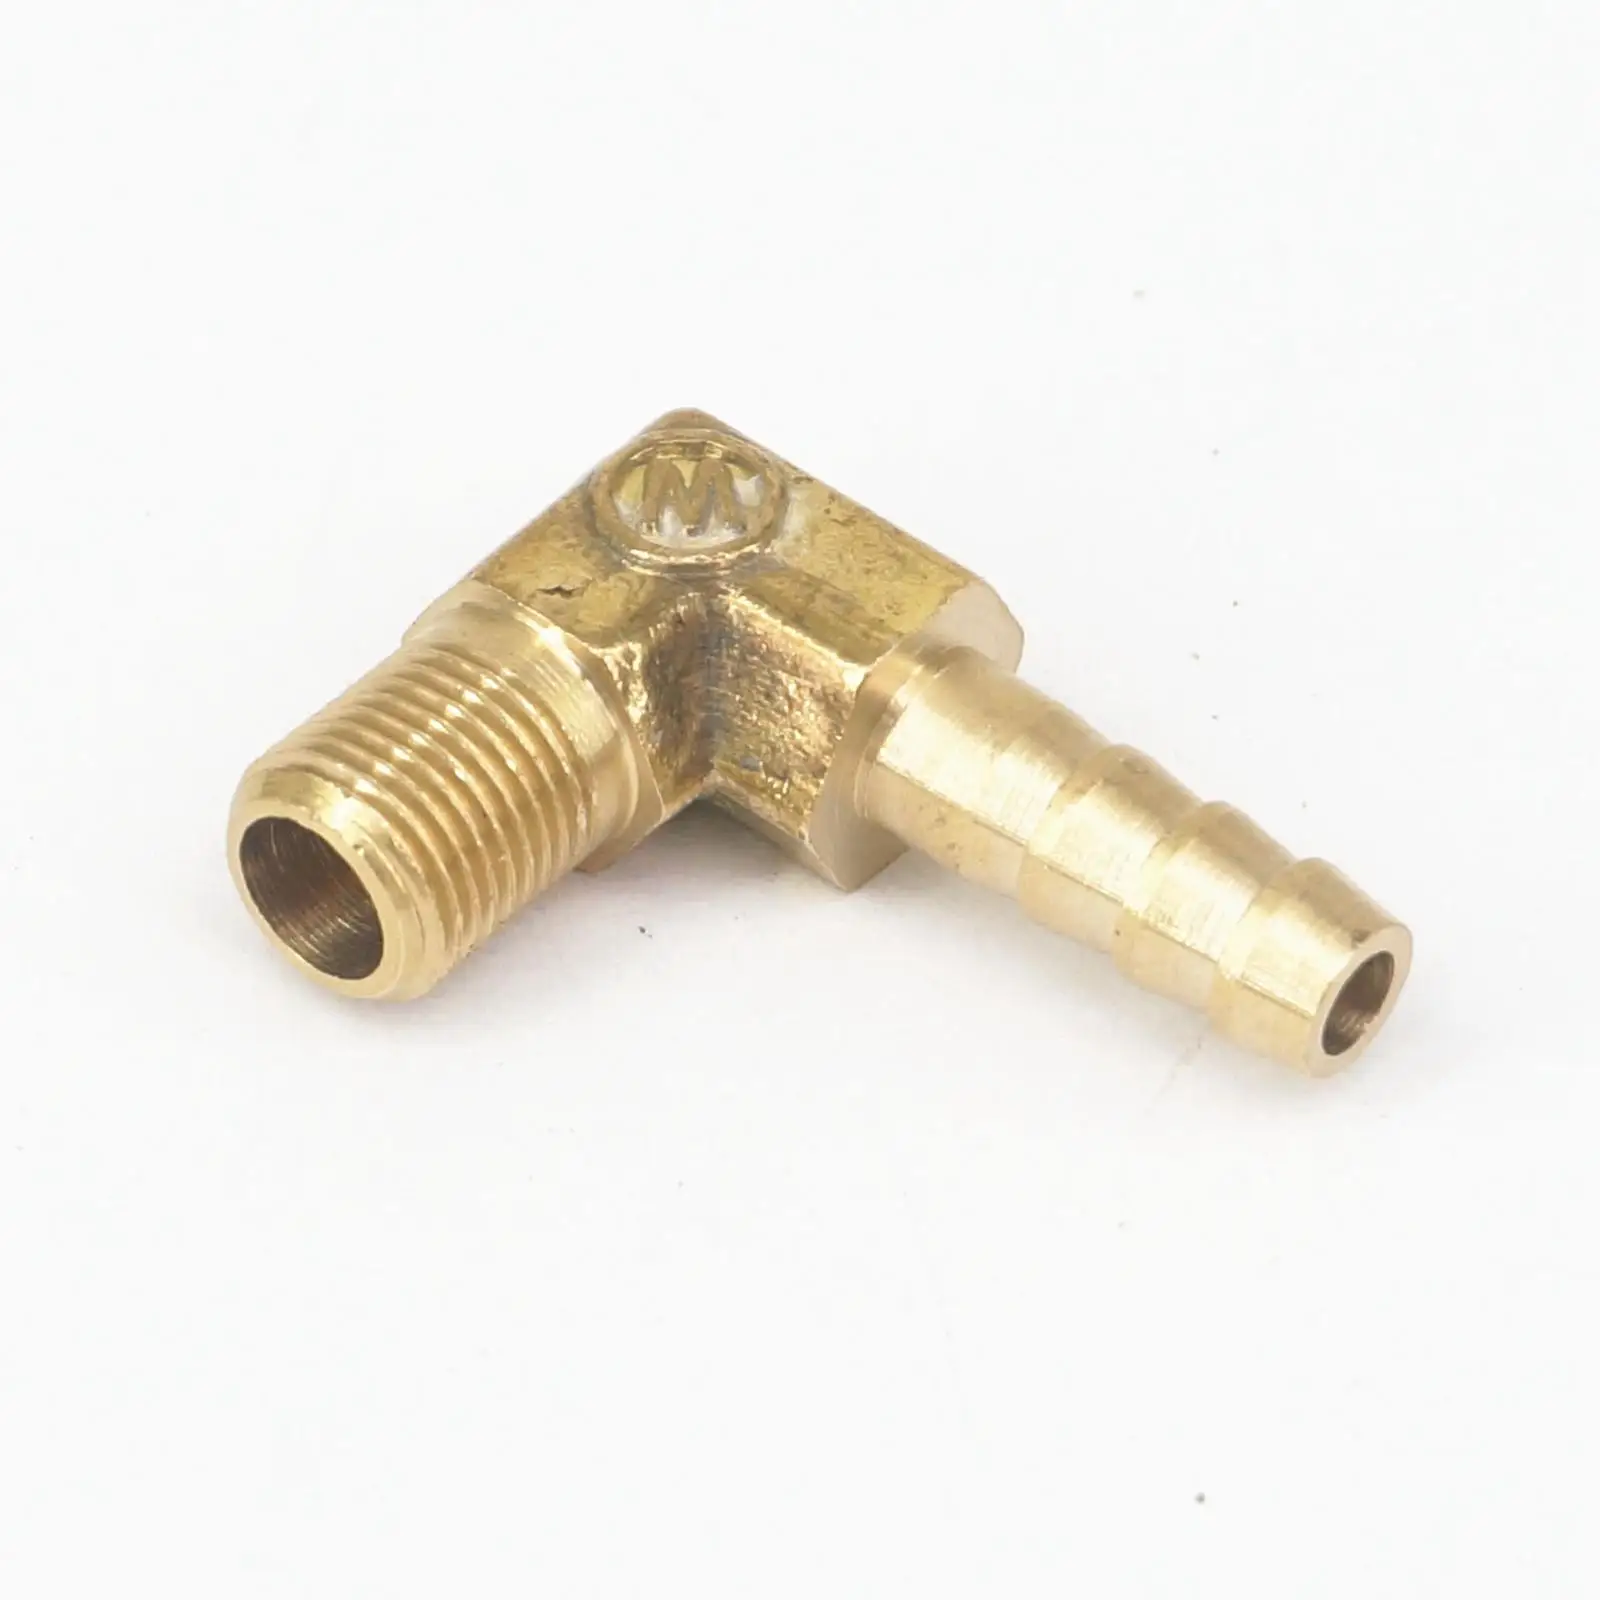 LOT 2 Hose Barb I/D 6mm x 1/8" BSP Male Elbow Brass coupler Splicer Pipe Fitting 